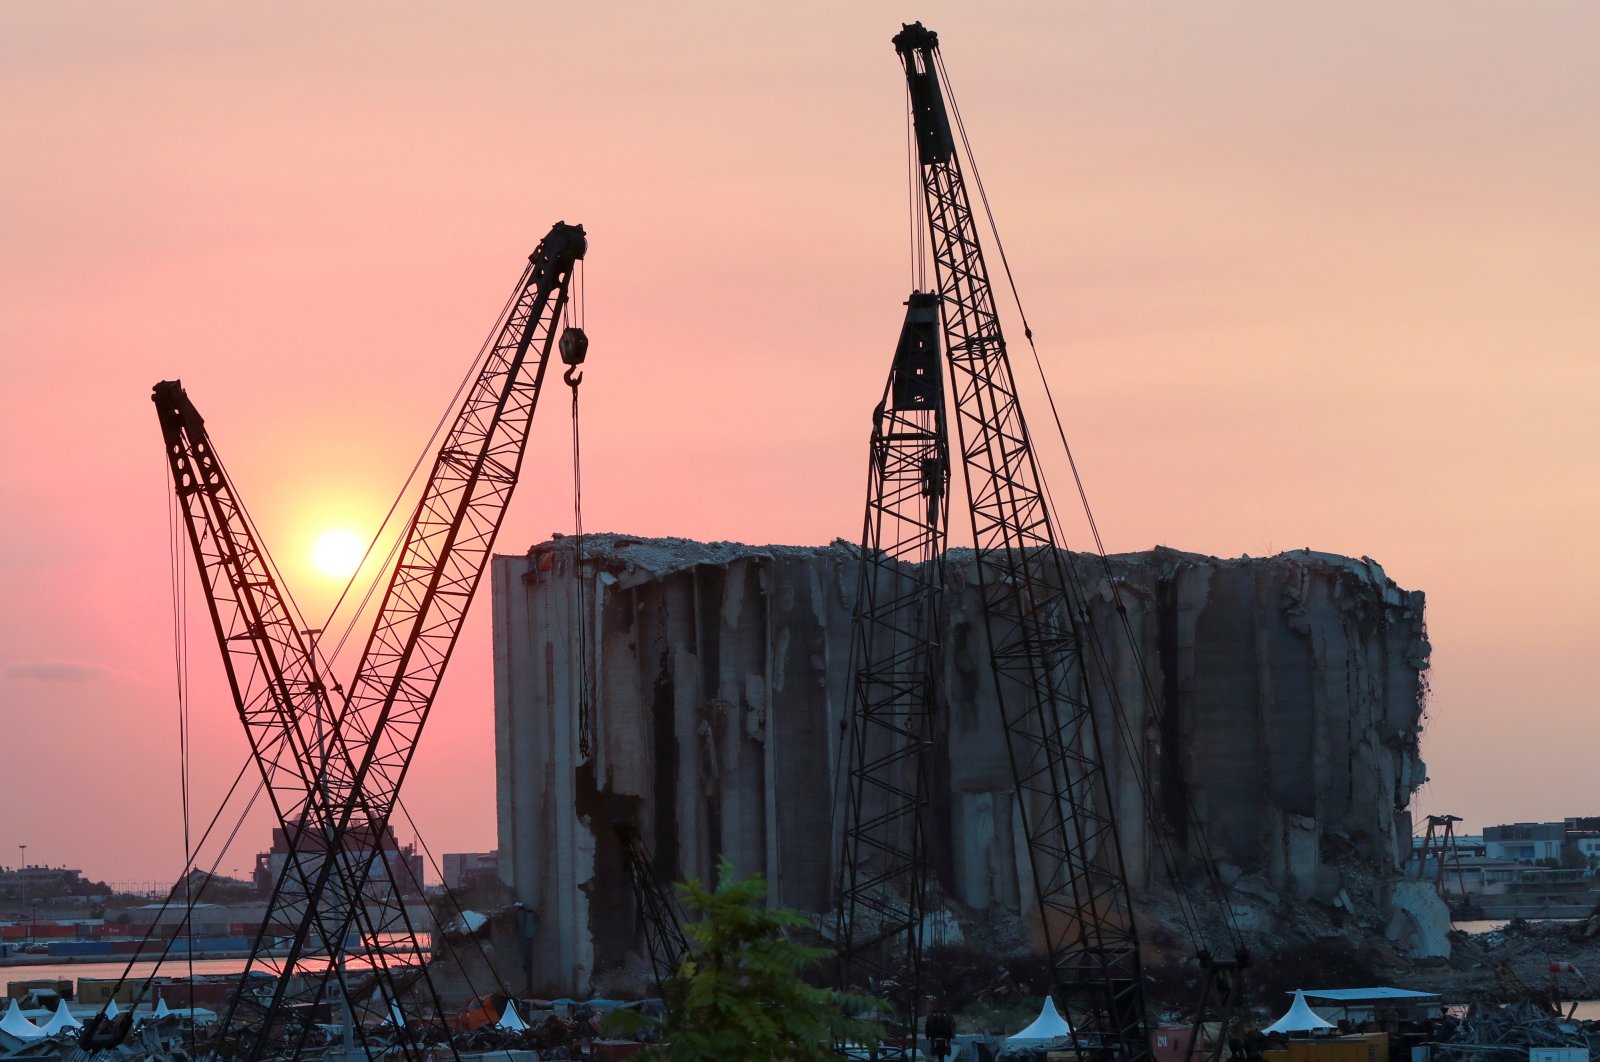 A view shows the grain silo that was damaged during last year&#039;s Beirut port blast, during sunset in Beirut, Lebanon, July 29, 2021. (Reuters Photo)